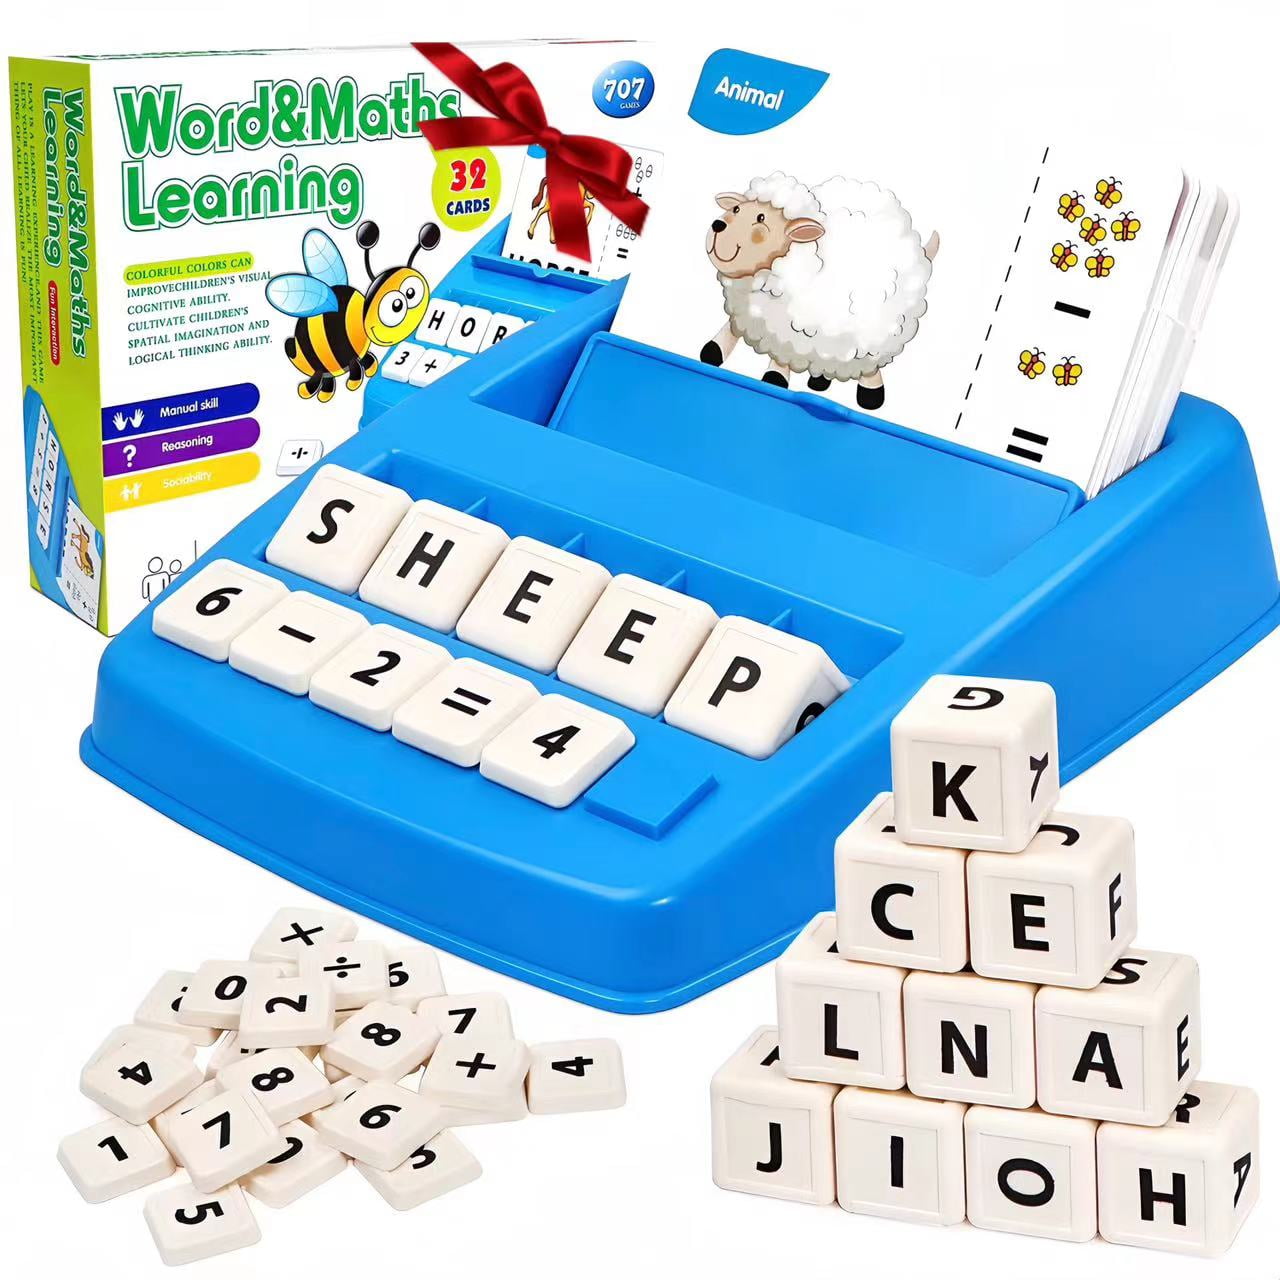  Kidbrix Alphabet Letter Lore Building Set, ABC Educational  Learning Activities Toys, Supplies for Preschool and Homeschool Kids Age  6+.(943PCS) : Toys & Games